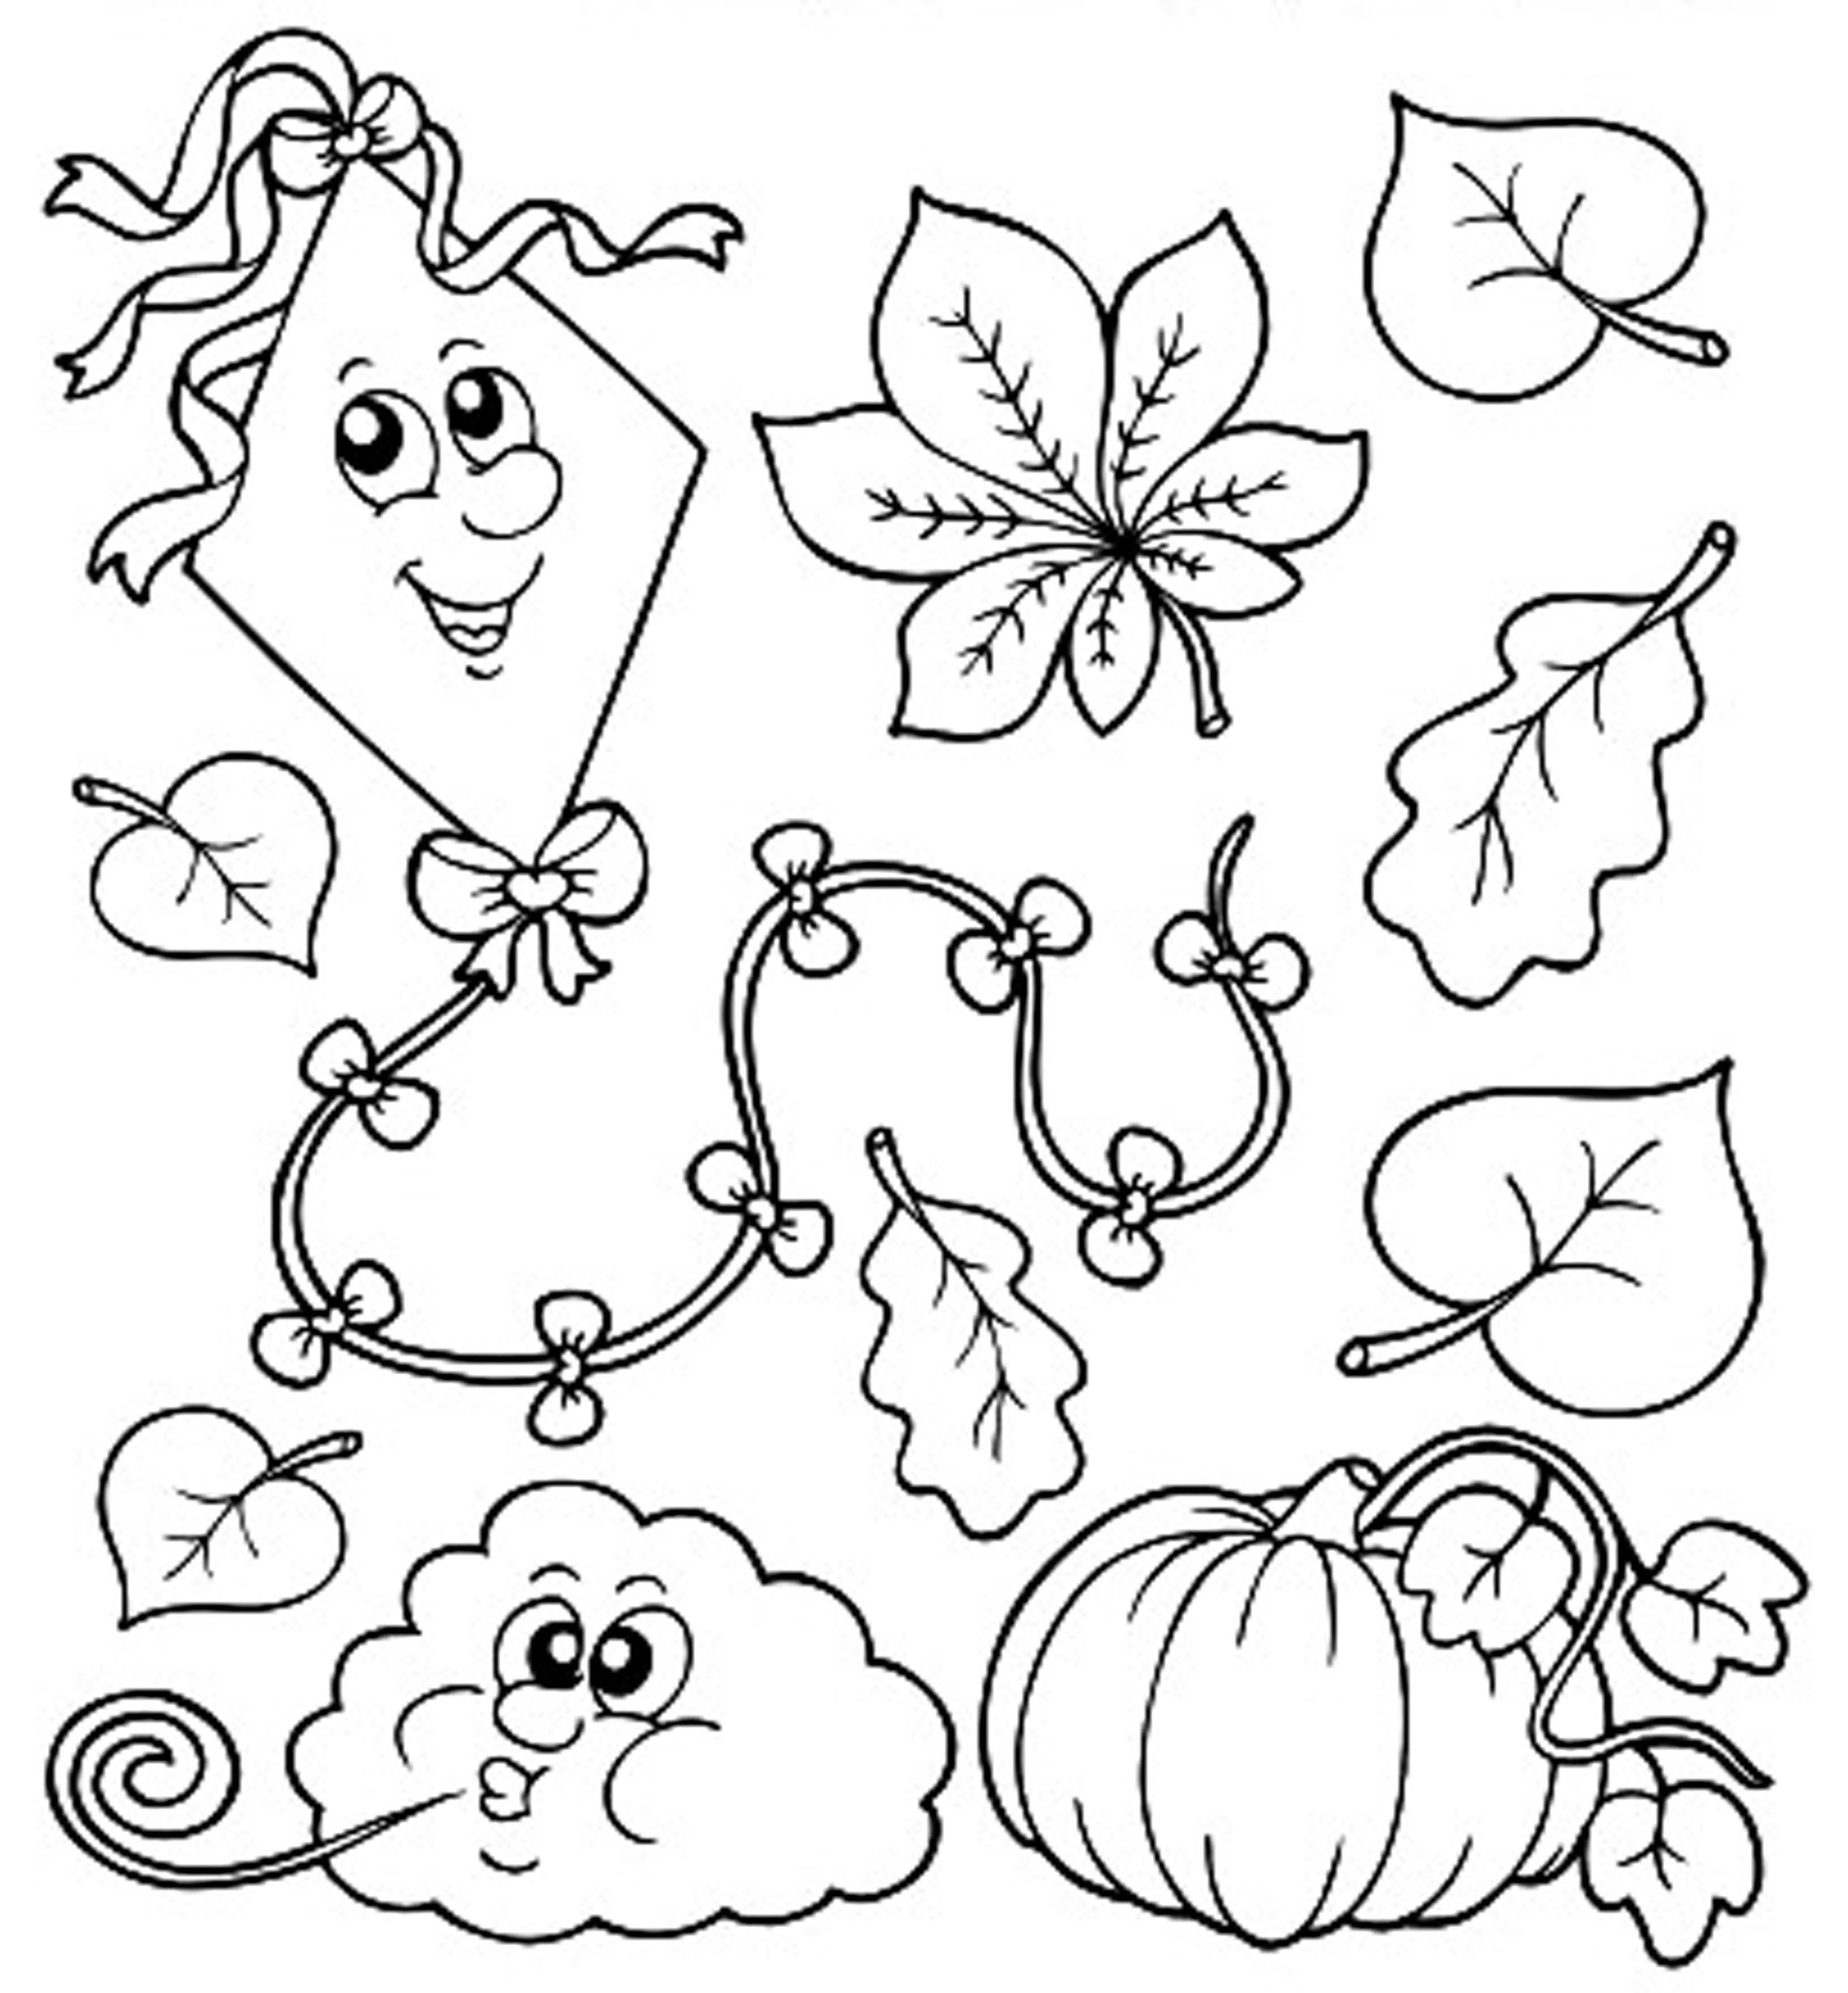 Autumn Coloring Pages For Kids at GetColorings.com | Free printable